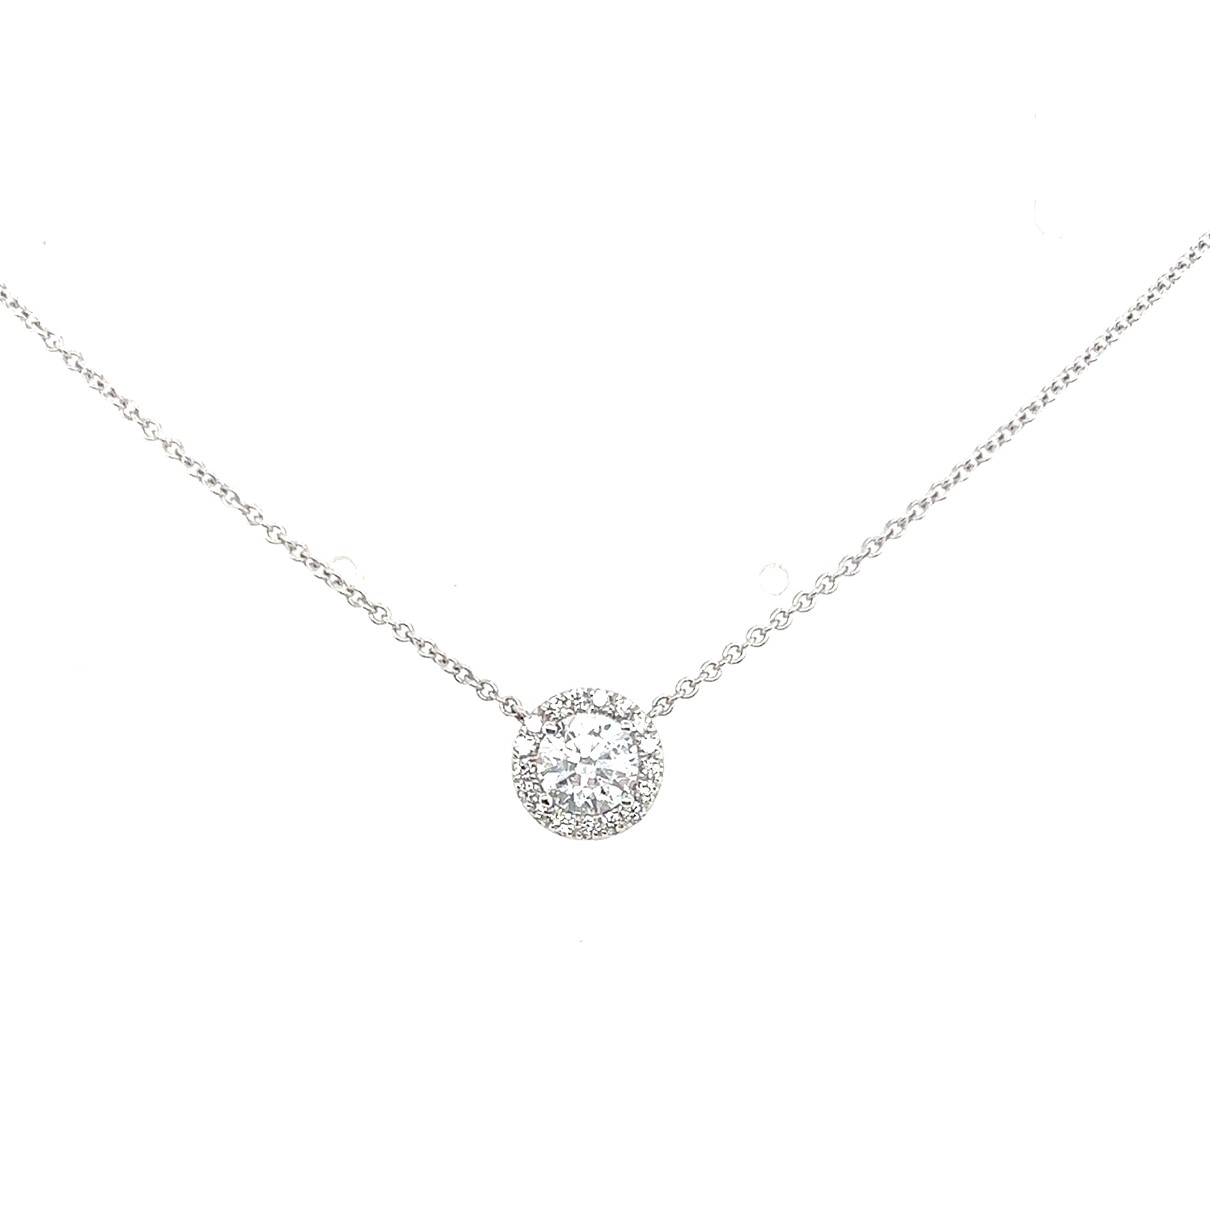 18kt White Gold Rbc Diamond Halo Pendant 0.70ct Ef/si2-i1 Center & 0.13ctw Rd Halo (0.83ctw) On 18 Cable Chain